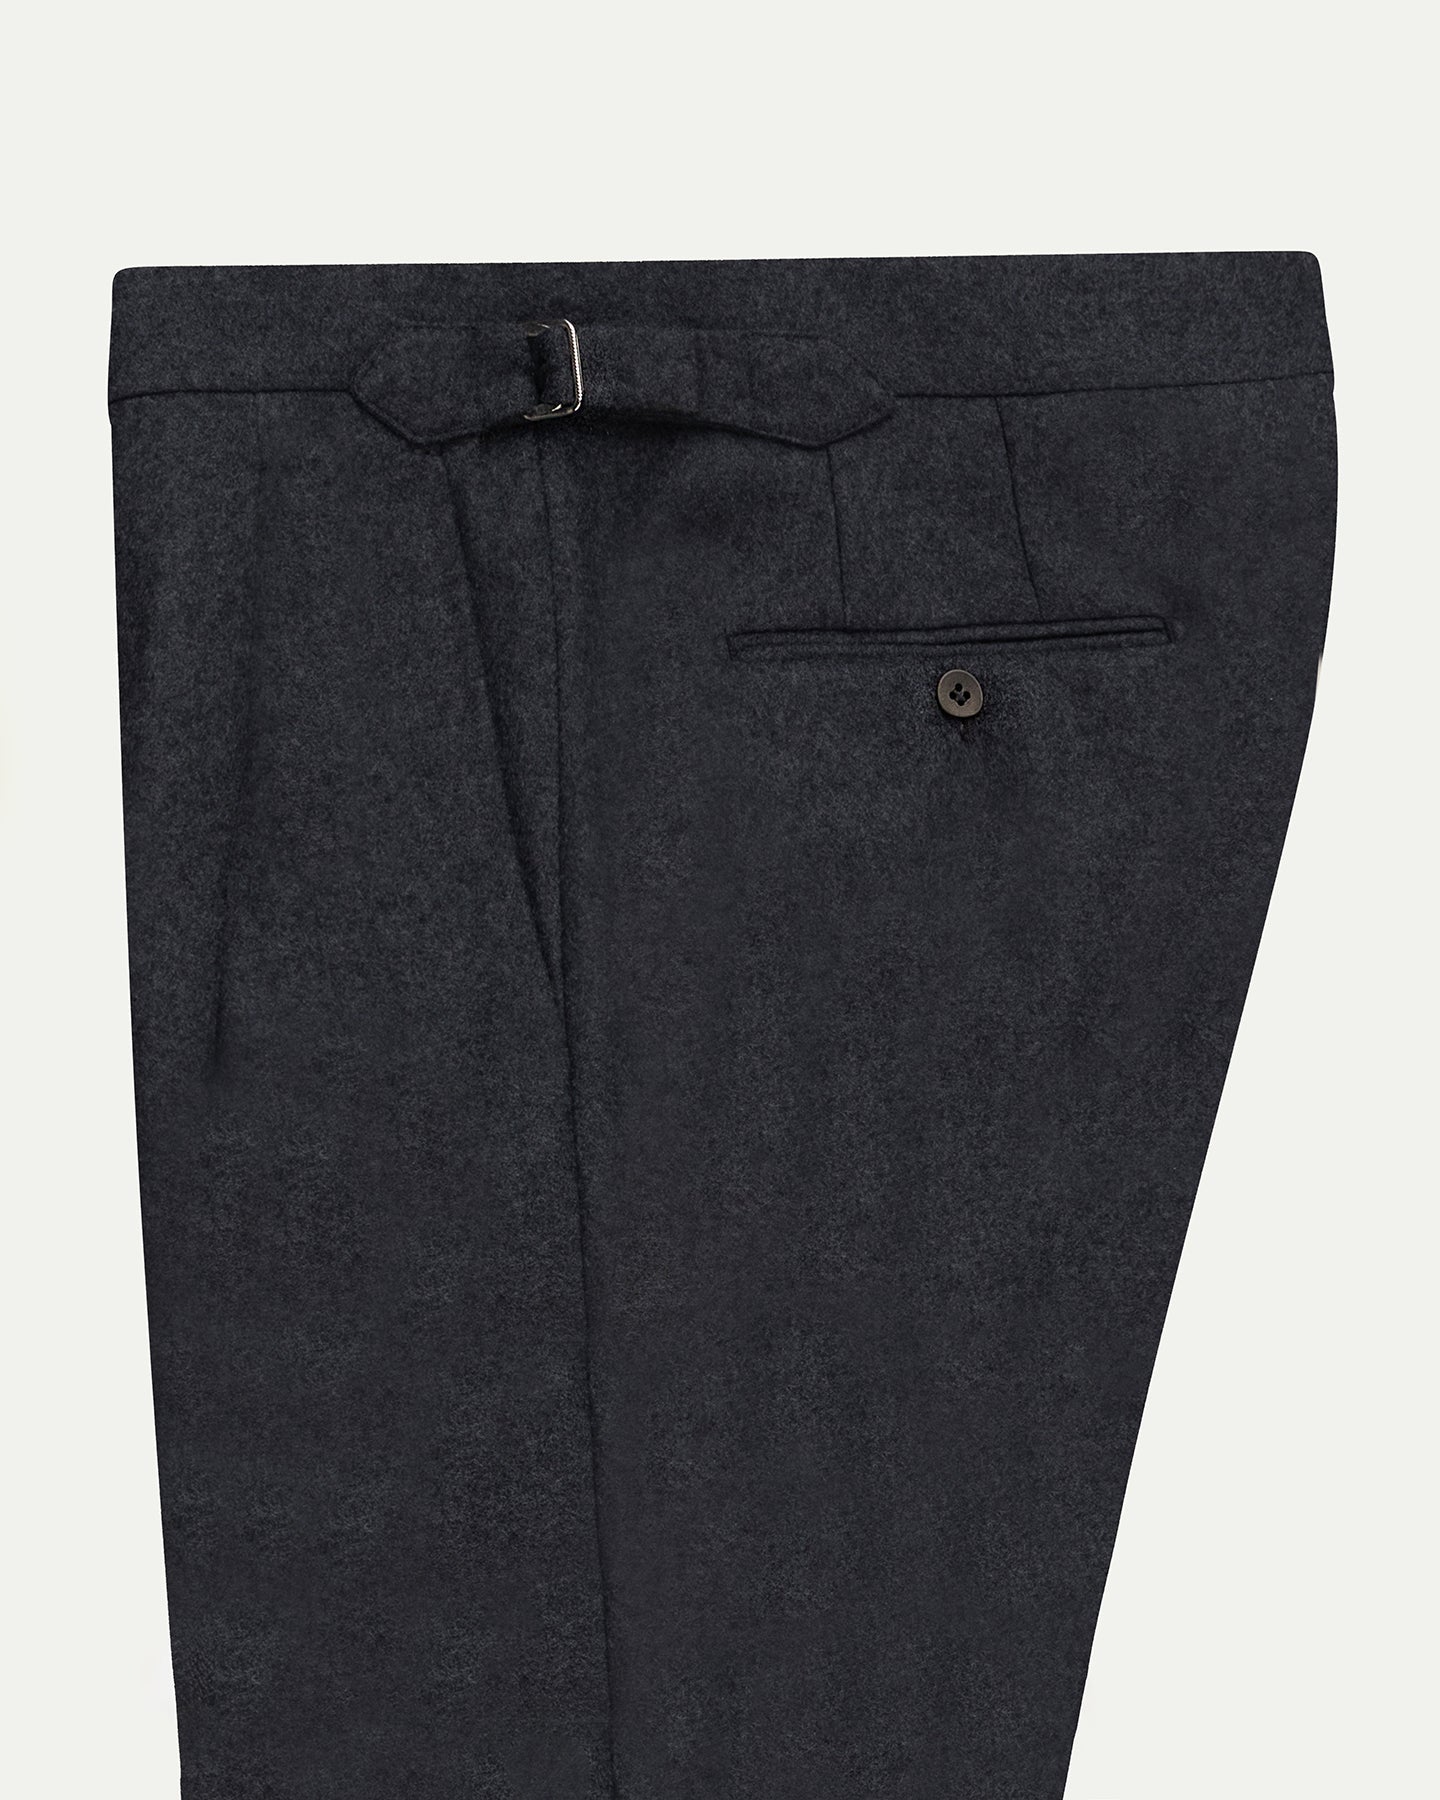 Made-To-Order Trousers in Dark Grey Flannel